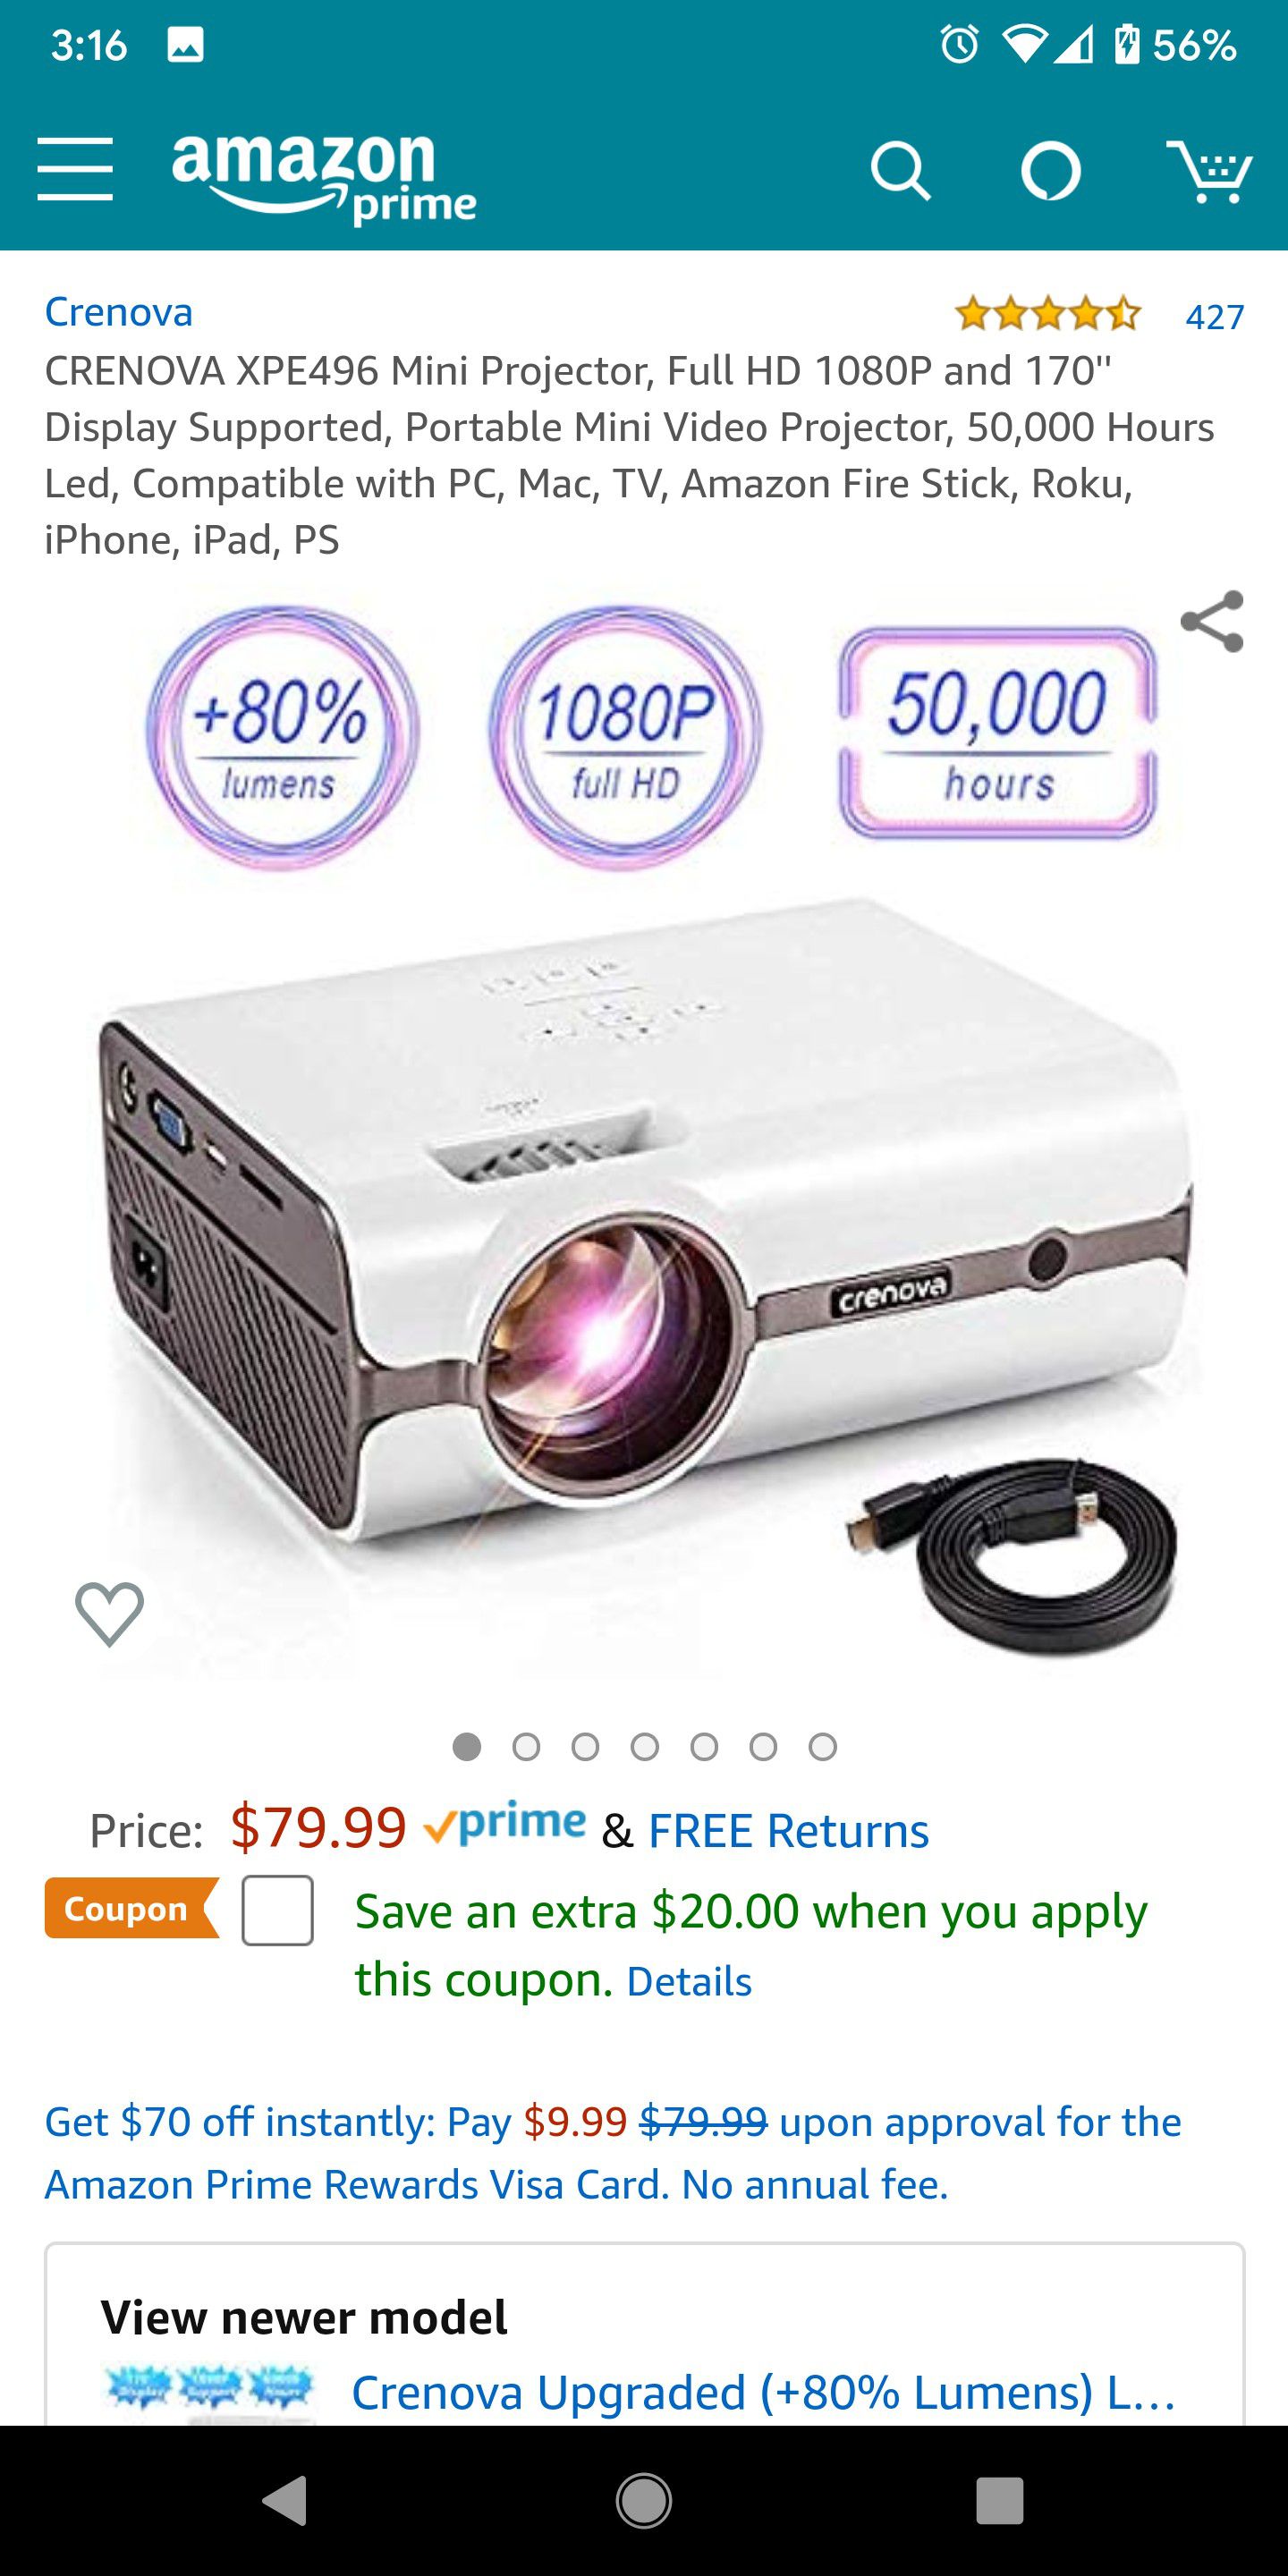 Home theater projector